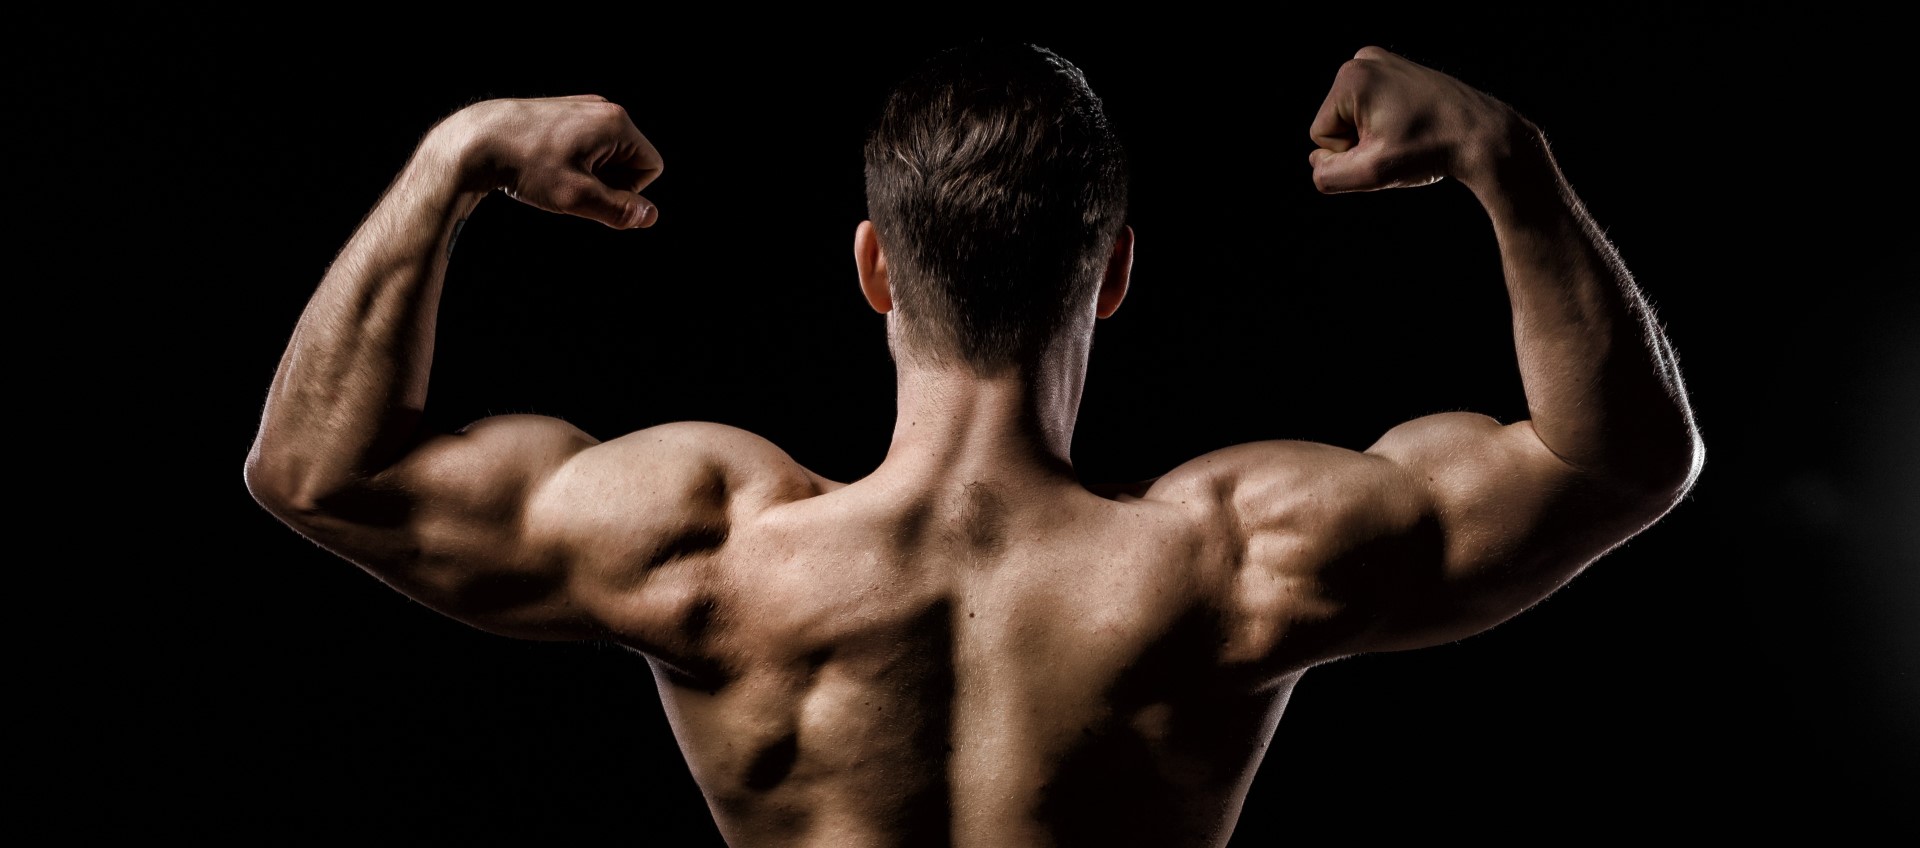 A picture of a man's back as he flexes his muscles